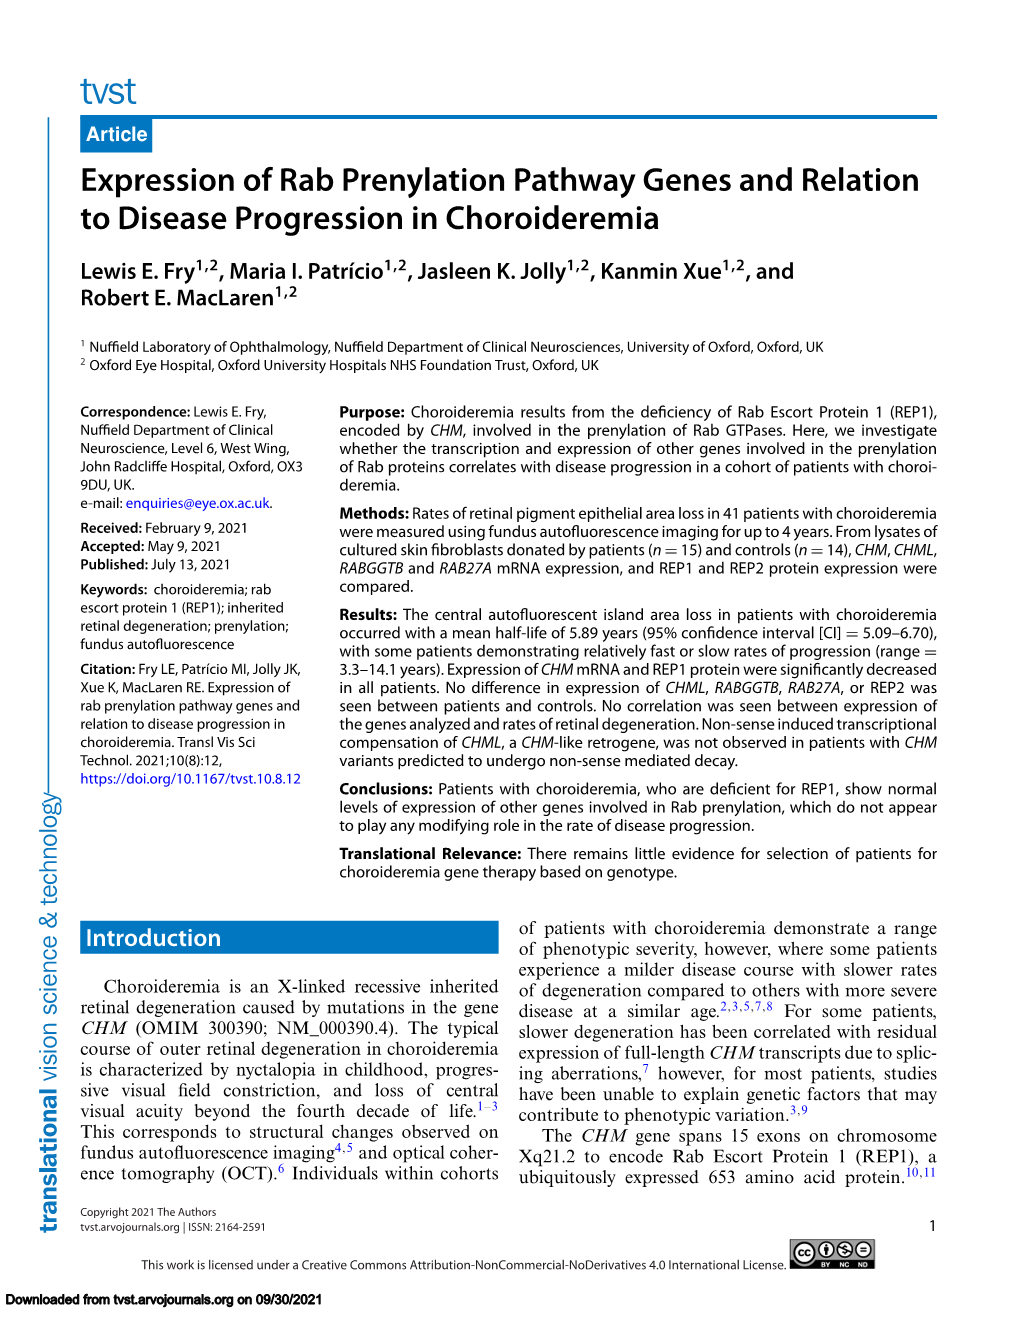 Expression of Rab Prenylation Pathway Genes and Relation to Disease Progression in Choroideremia